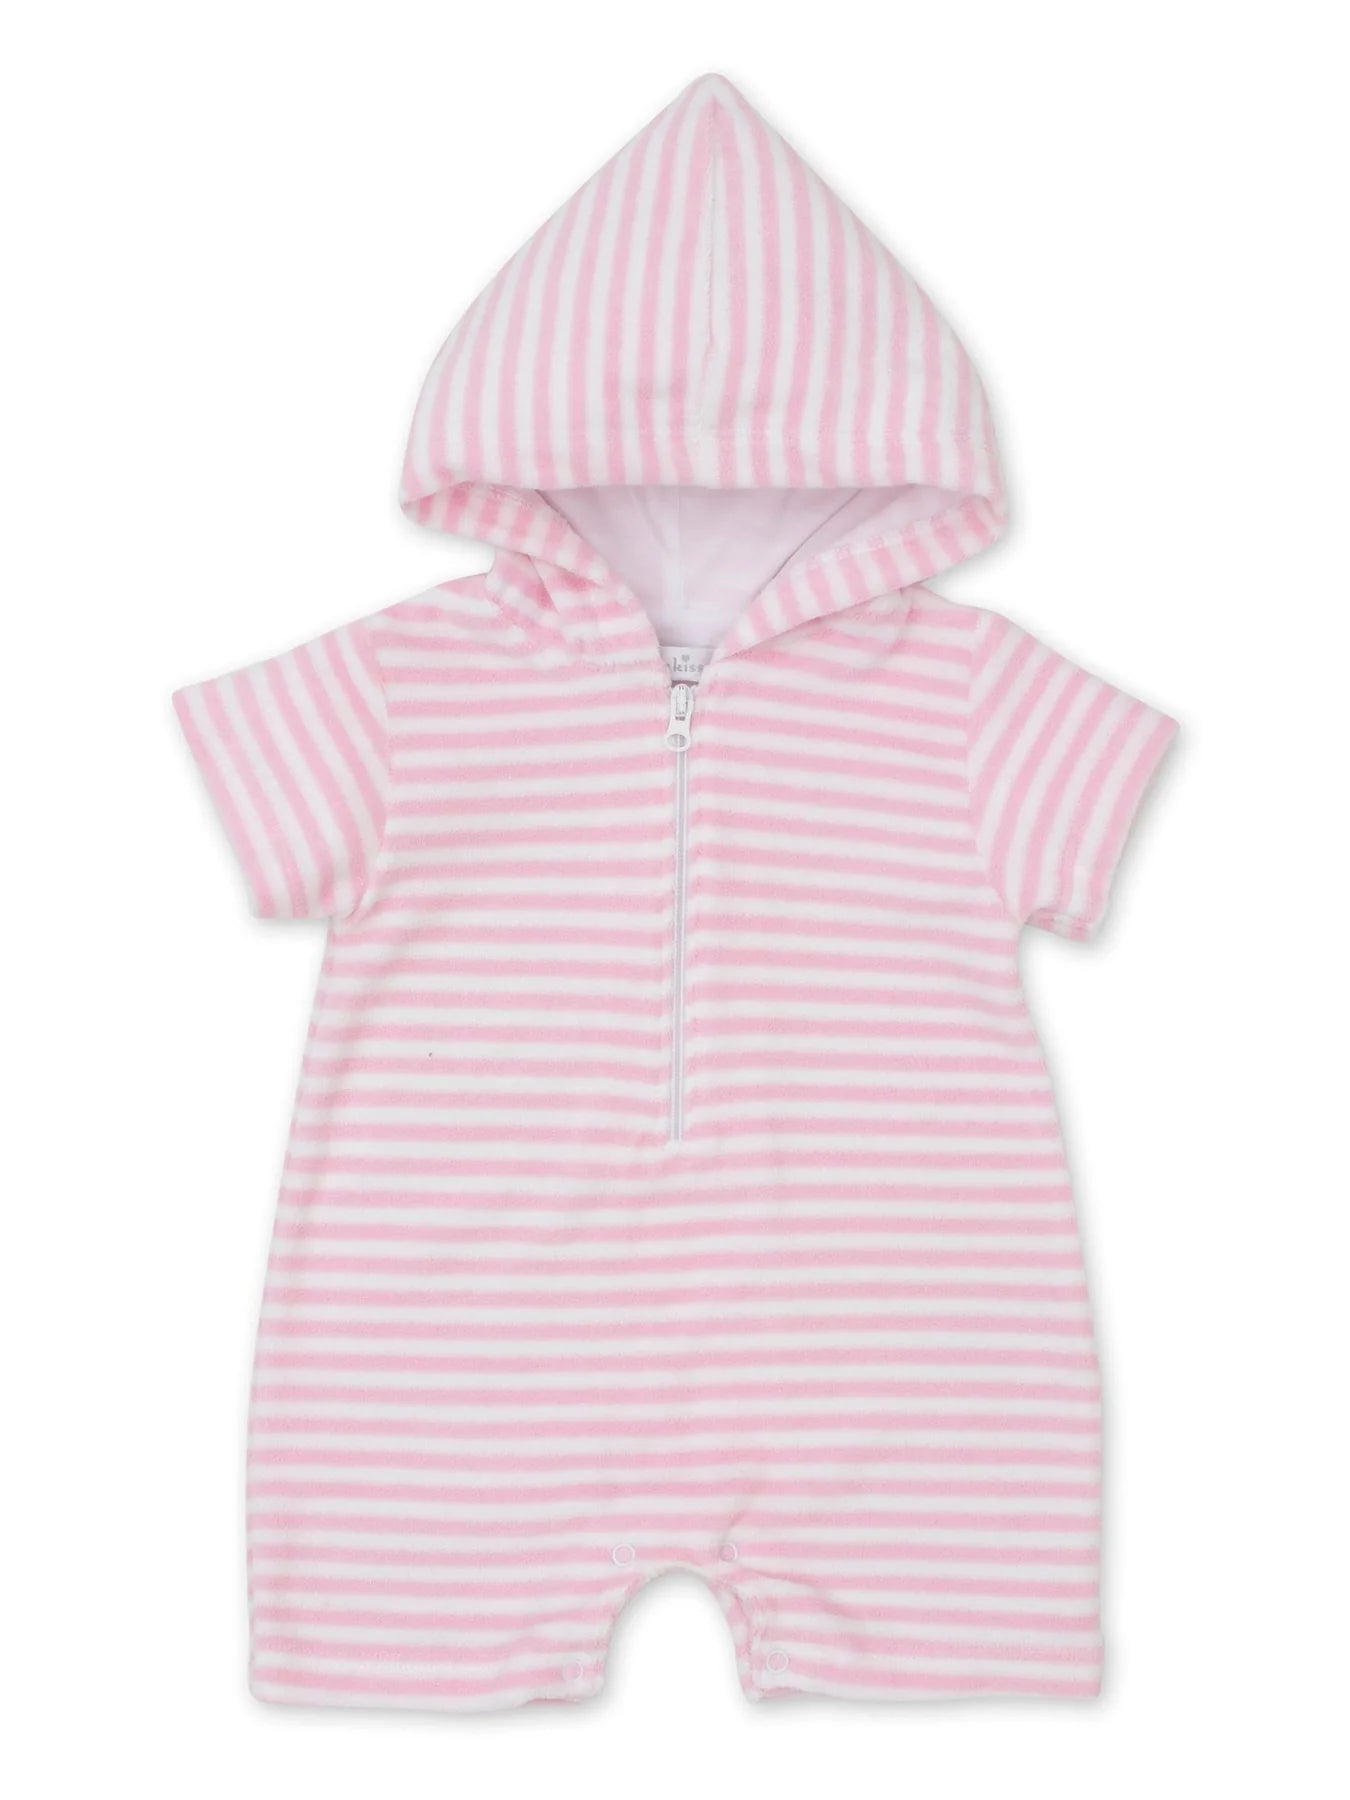 WHALE WATCH TERRY ROMPER - PINK